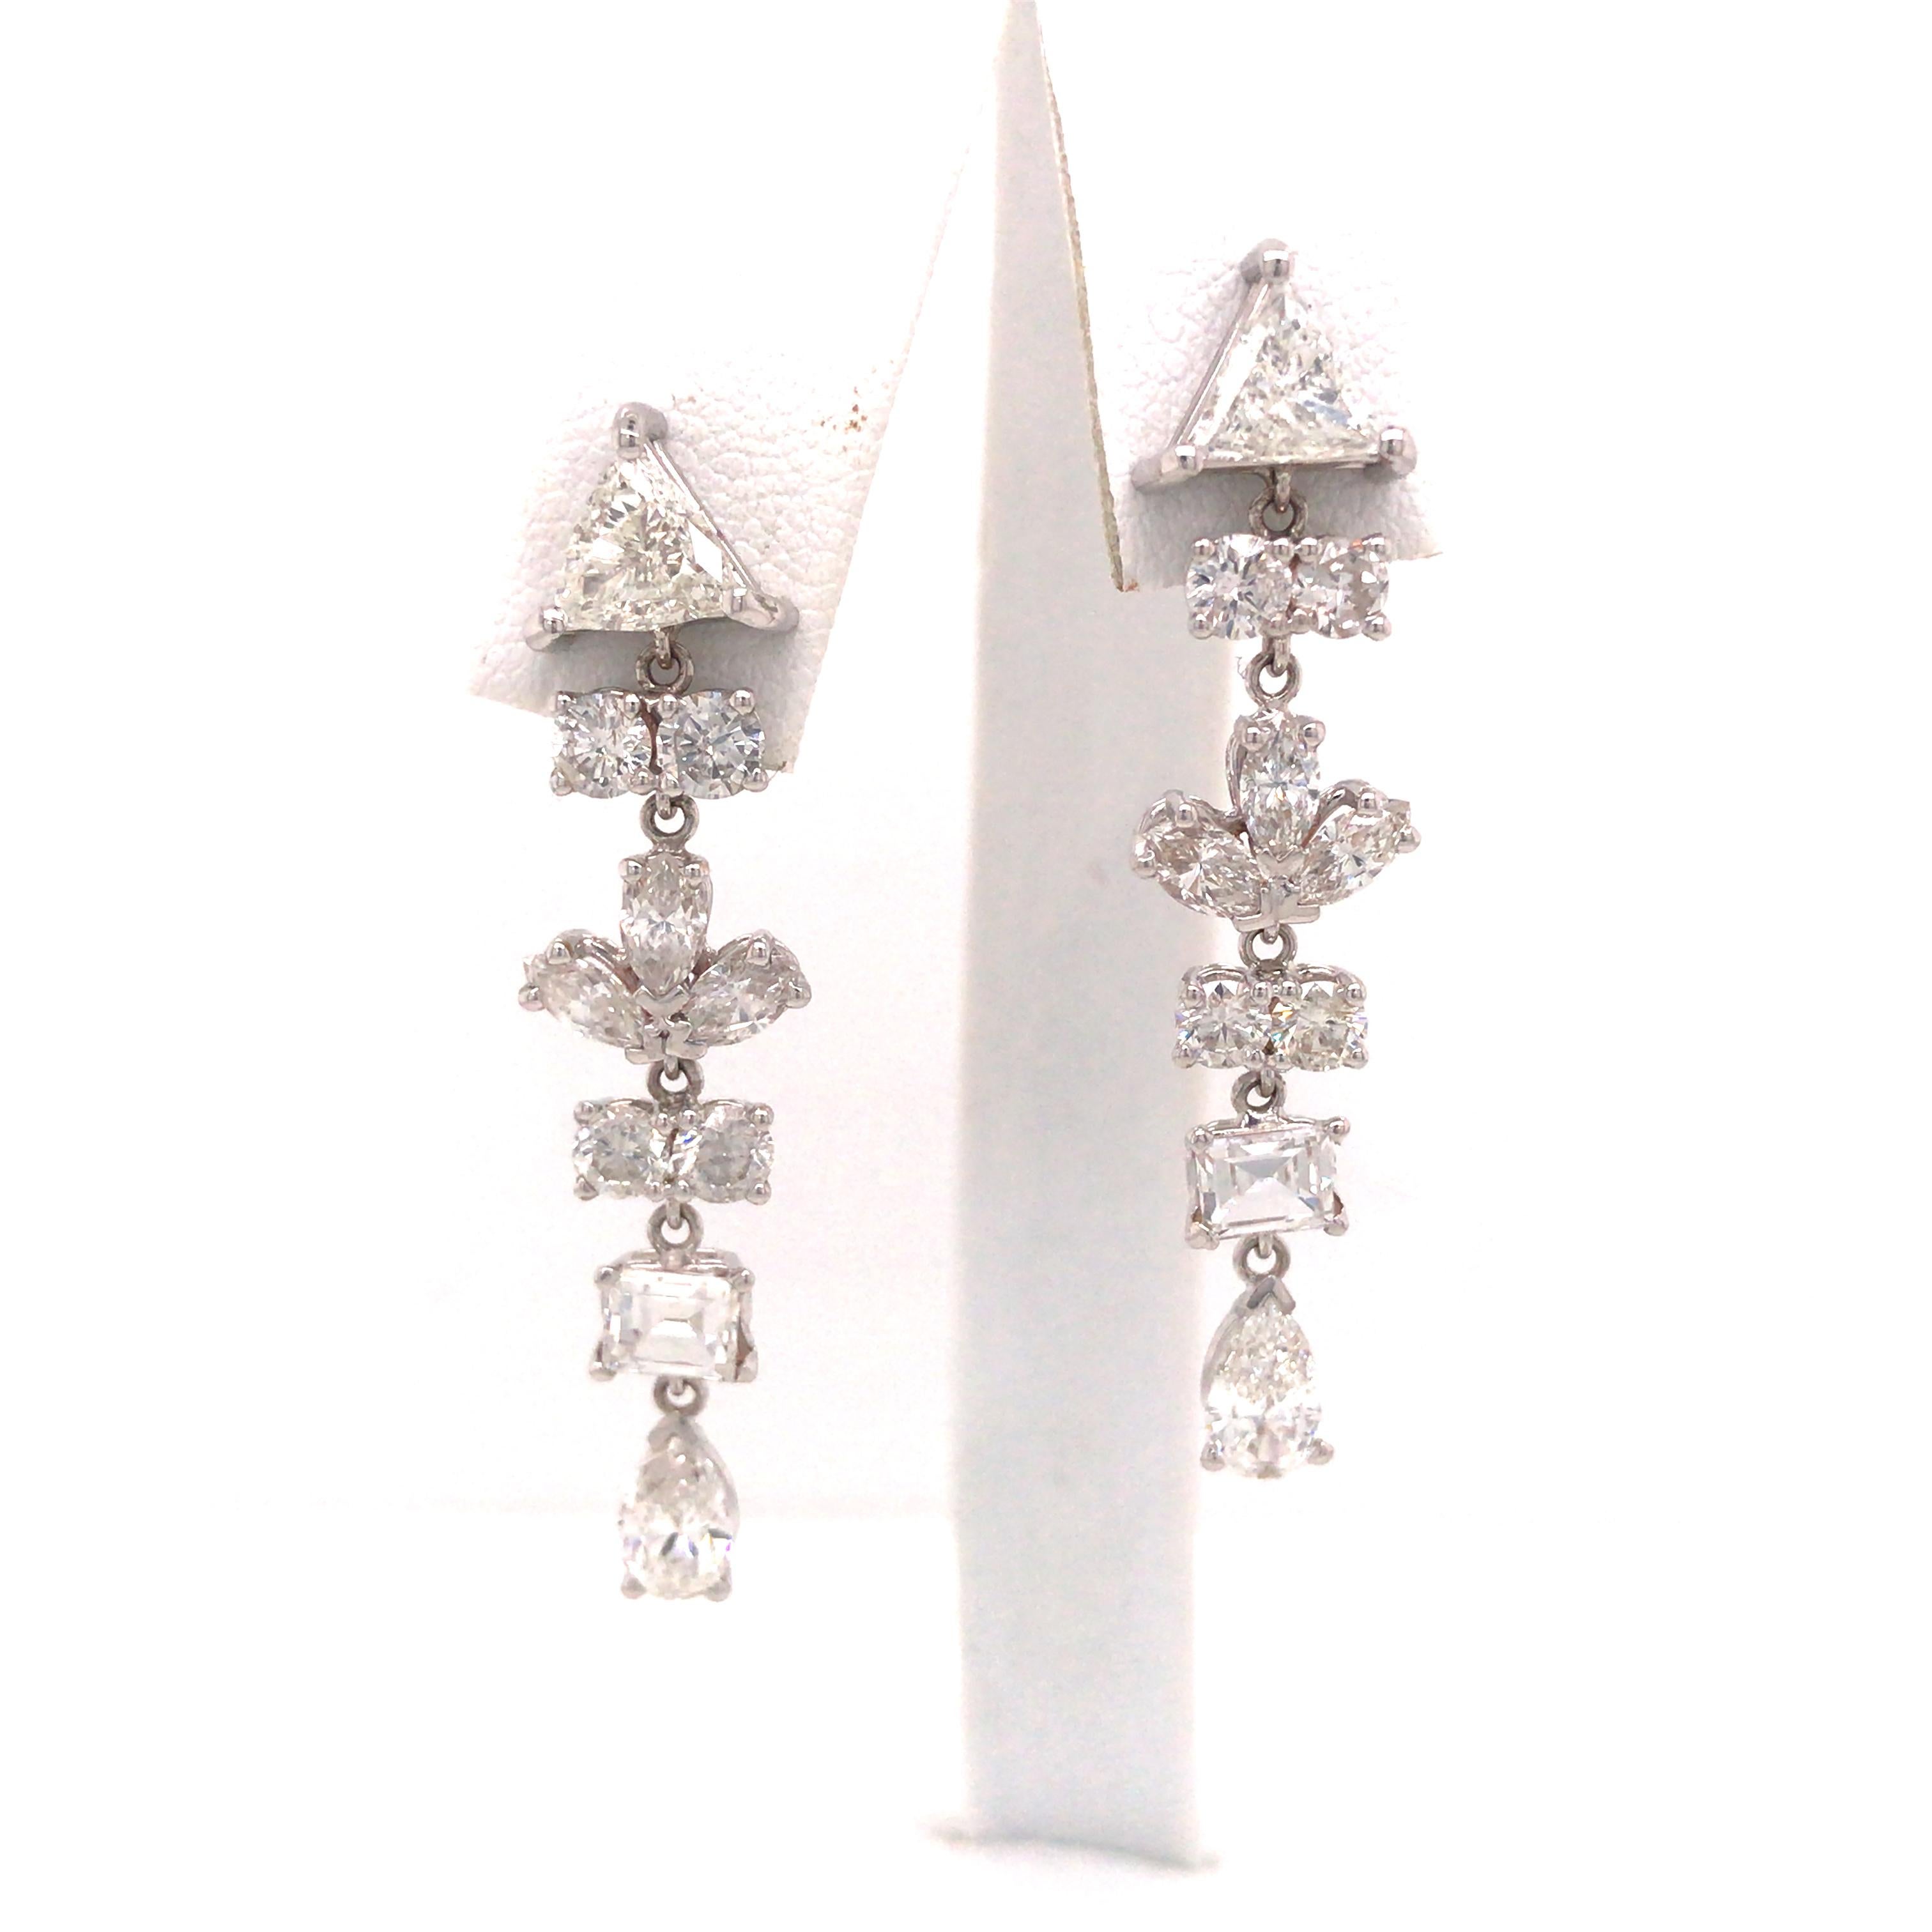 Multi Shape Diamond Hanging Earring in 18K White Gold.  (8) Round Brilliant Cut, (2) Trillion, (6) Marquise, (2) Baguette and (2) Pear Shape Diamonds weighing 4.82 carat total weight, G-I in color and VS-SI in clarity are expertly set.  The Earrings